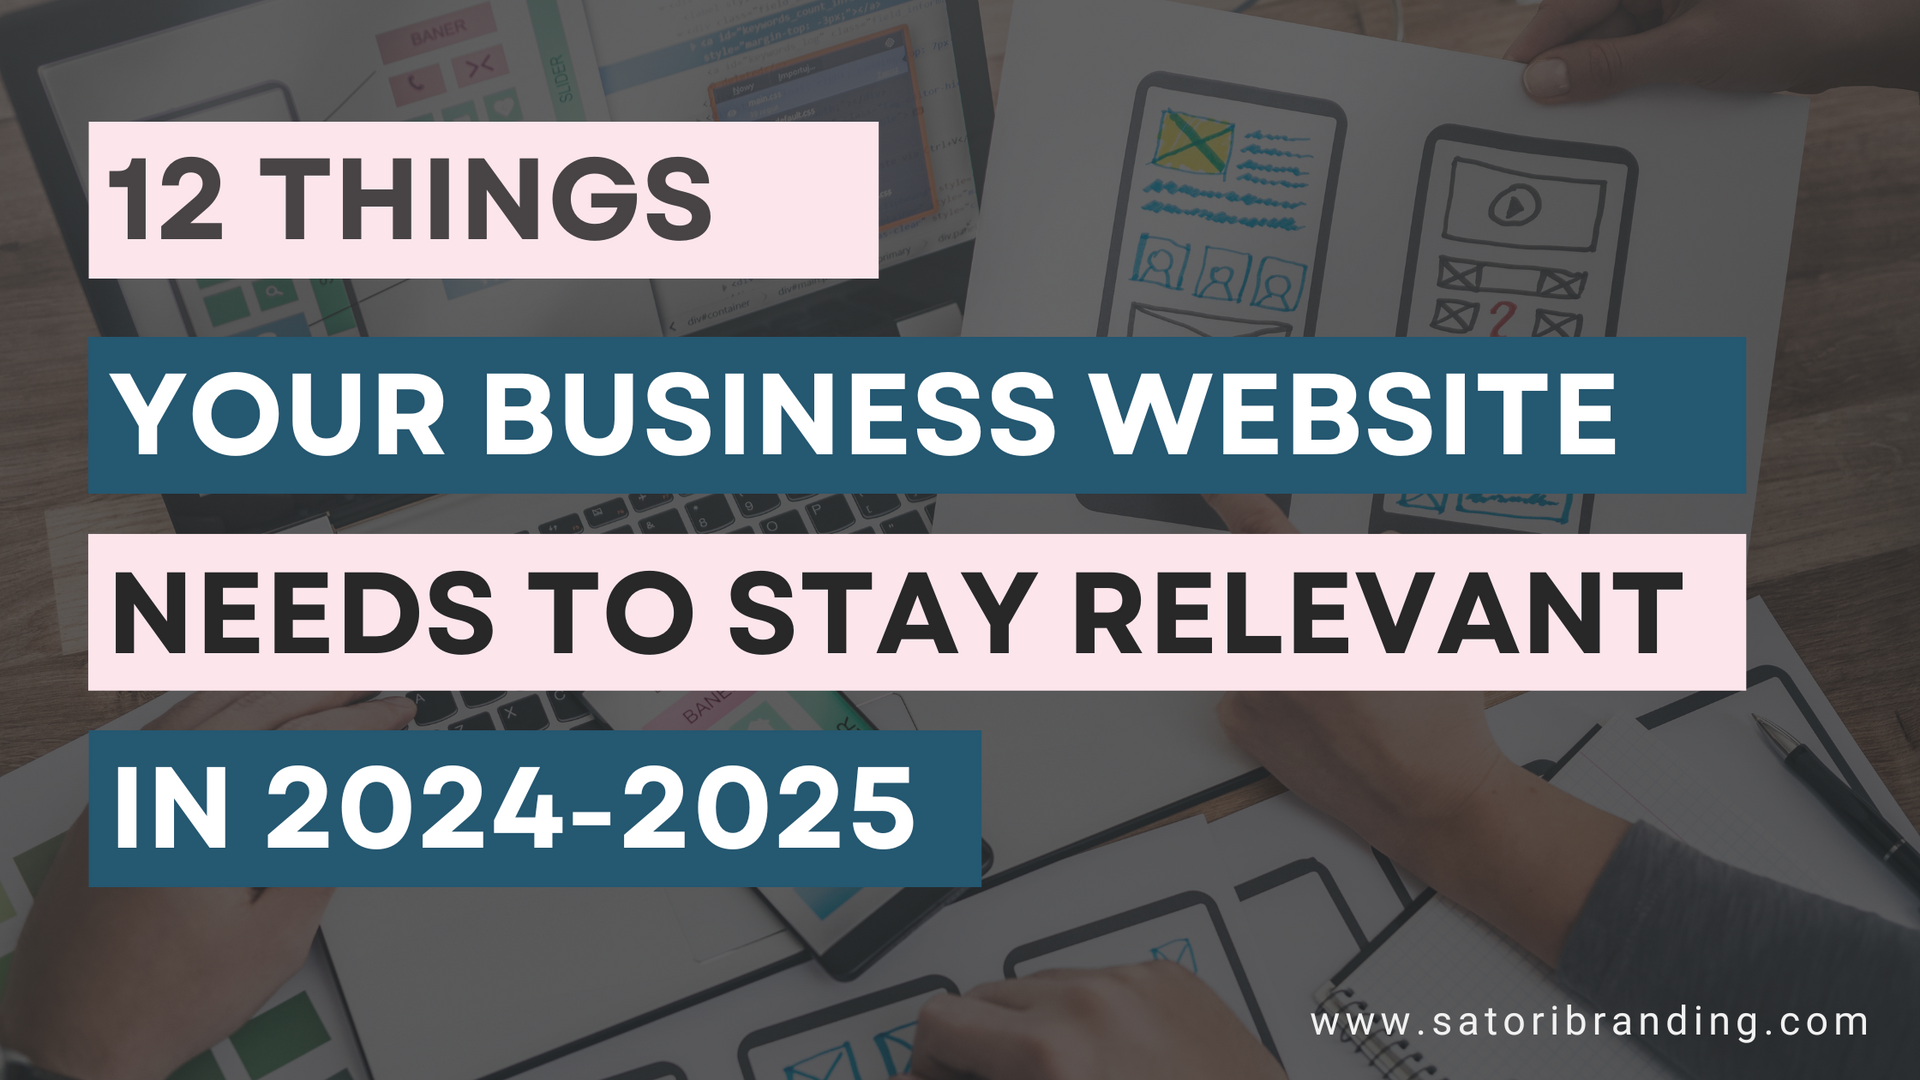 Sator Branding and Digital Marketing: 10 things your business website needs to stay relevant